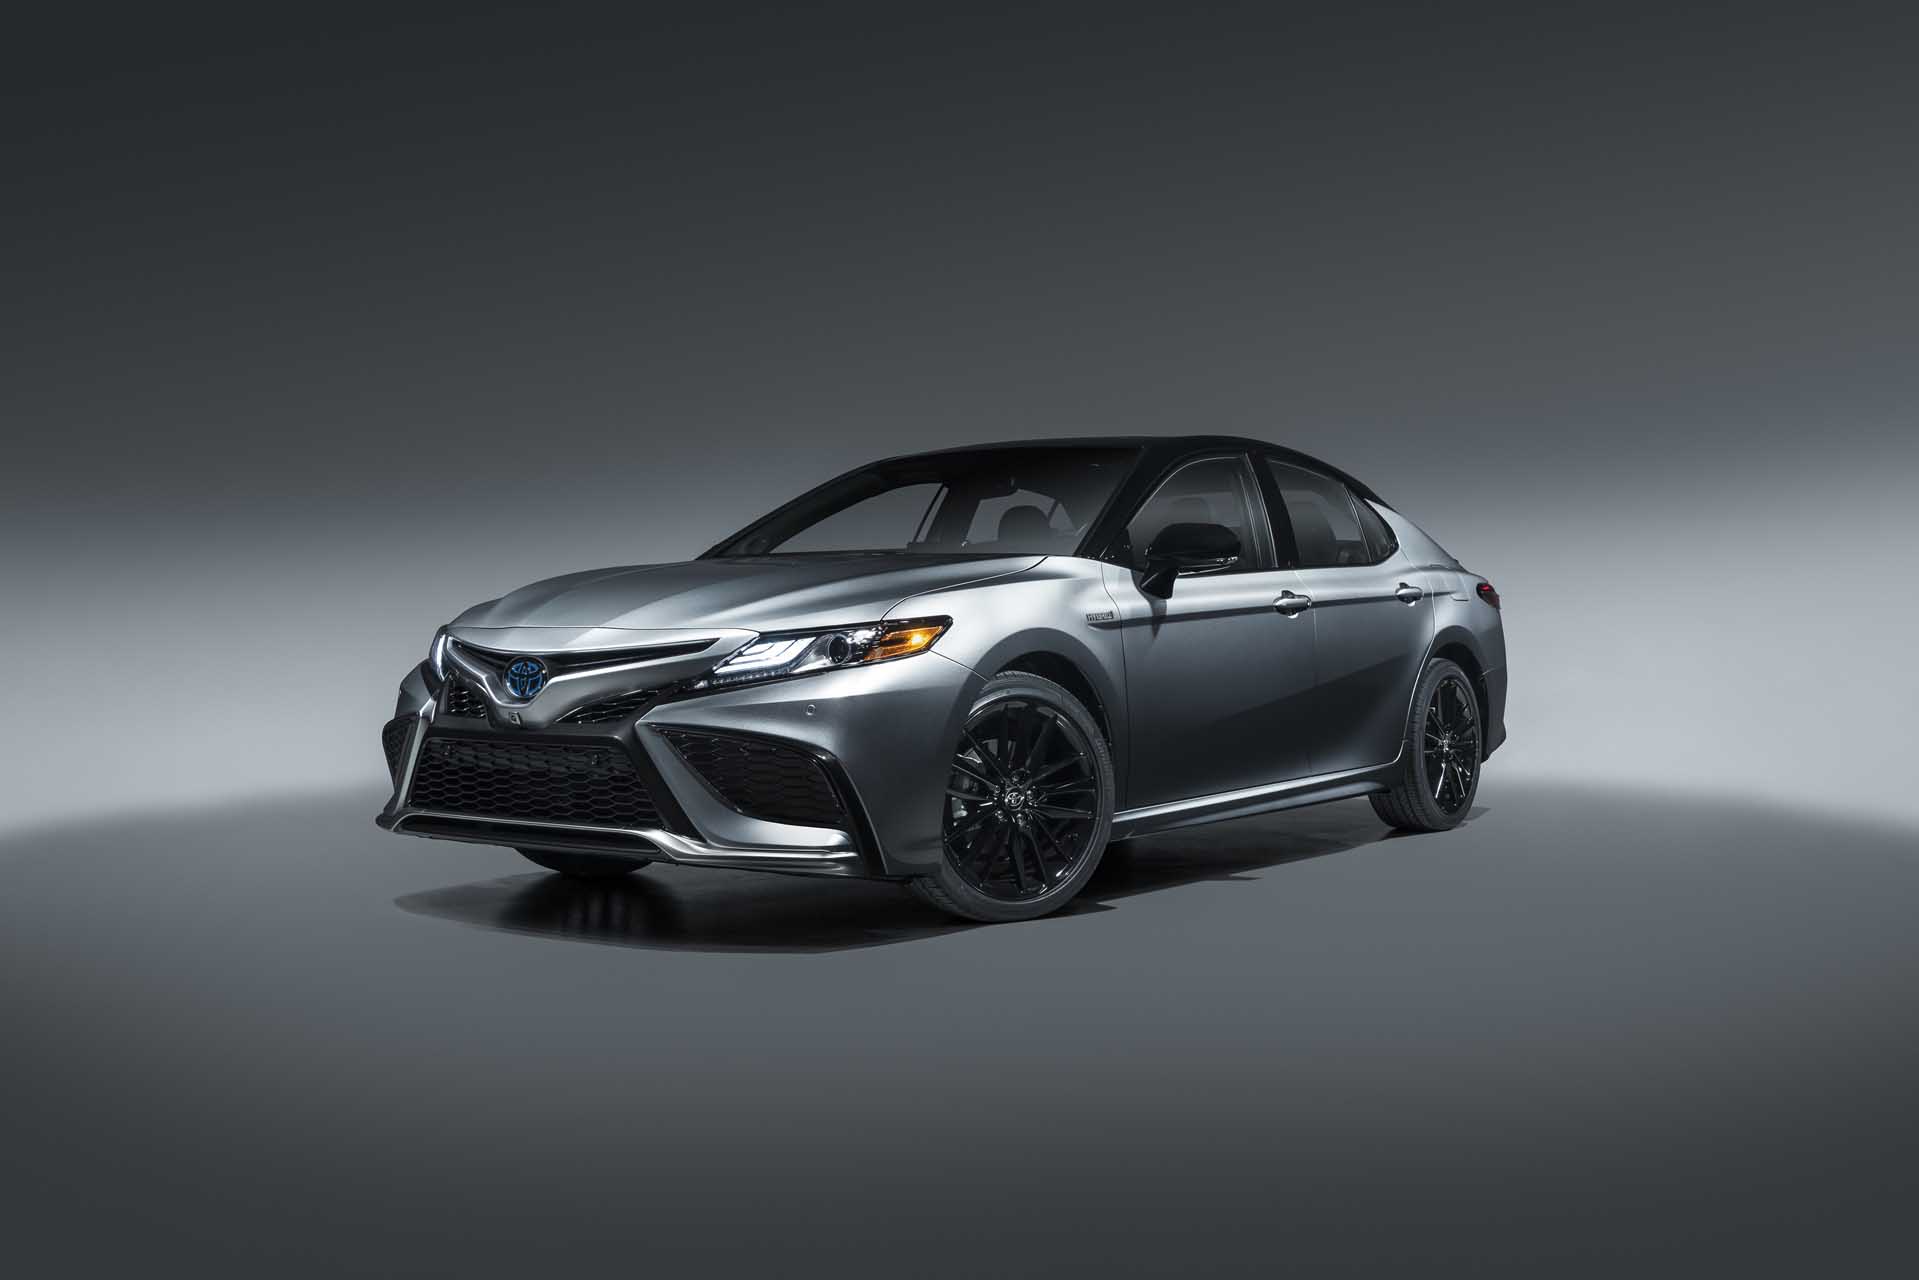 2021 Toyota Camry Hybrid Xse Coming Sporty 2021 Corolla Apex Ahead Too